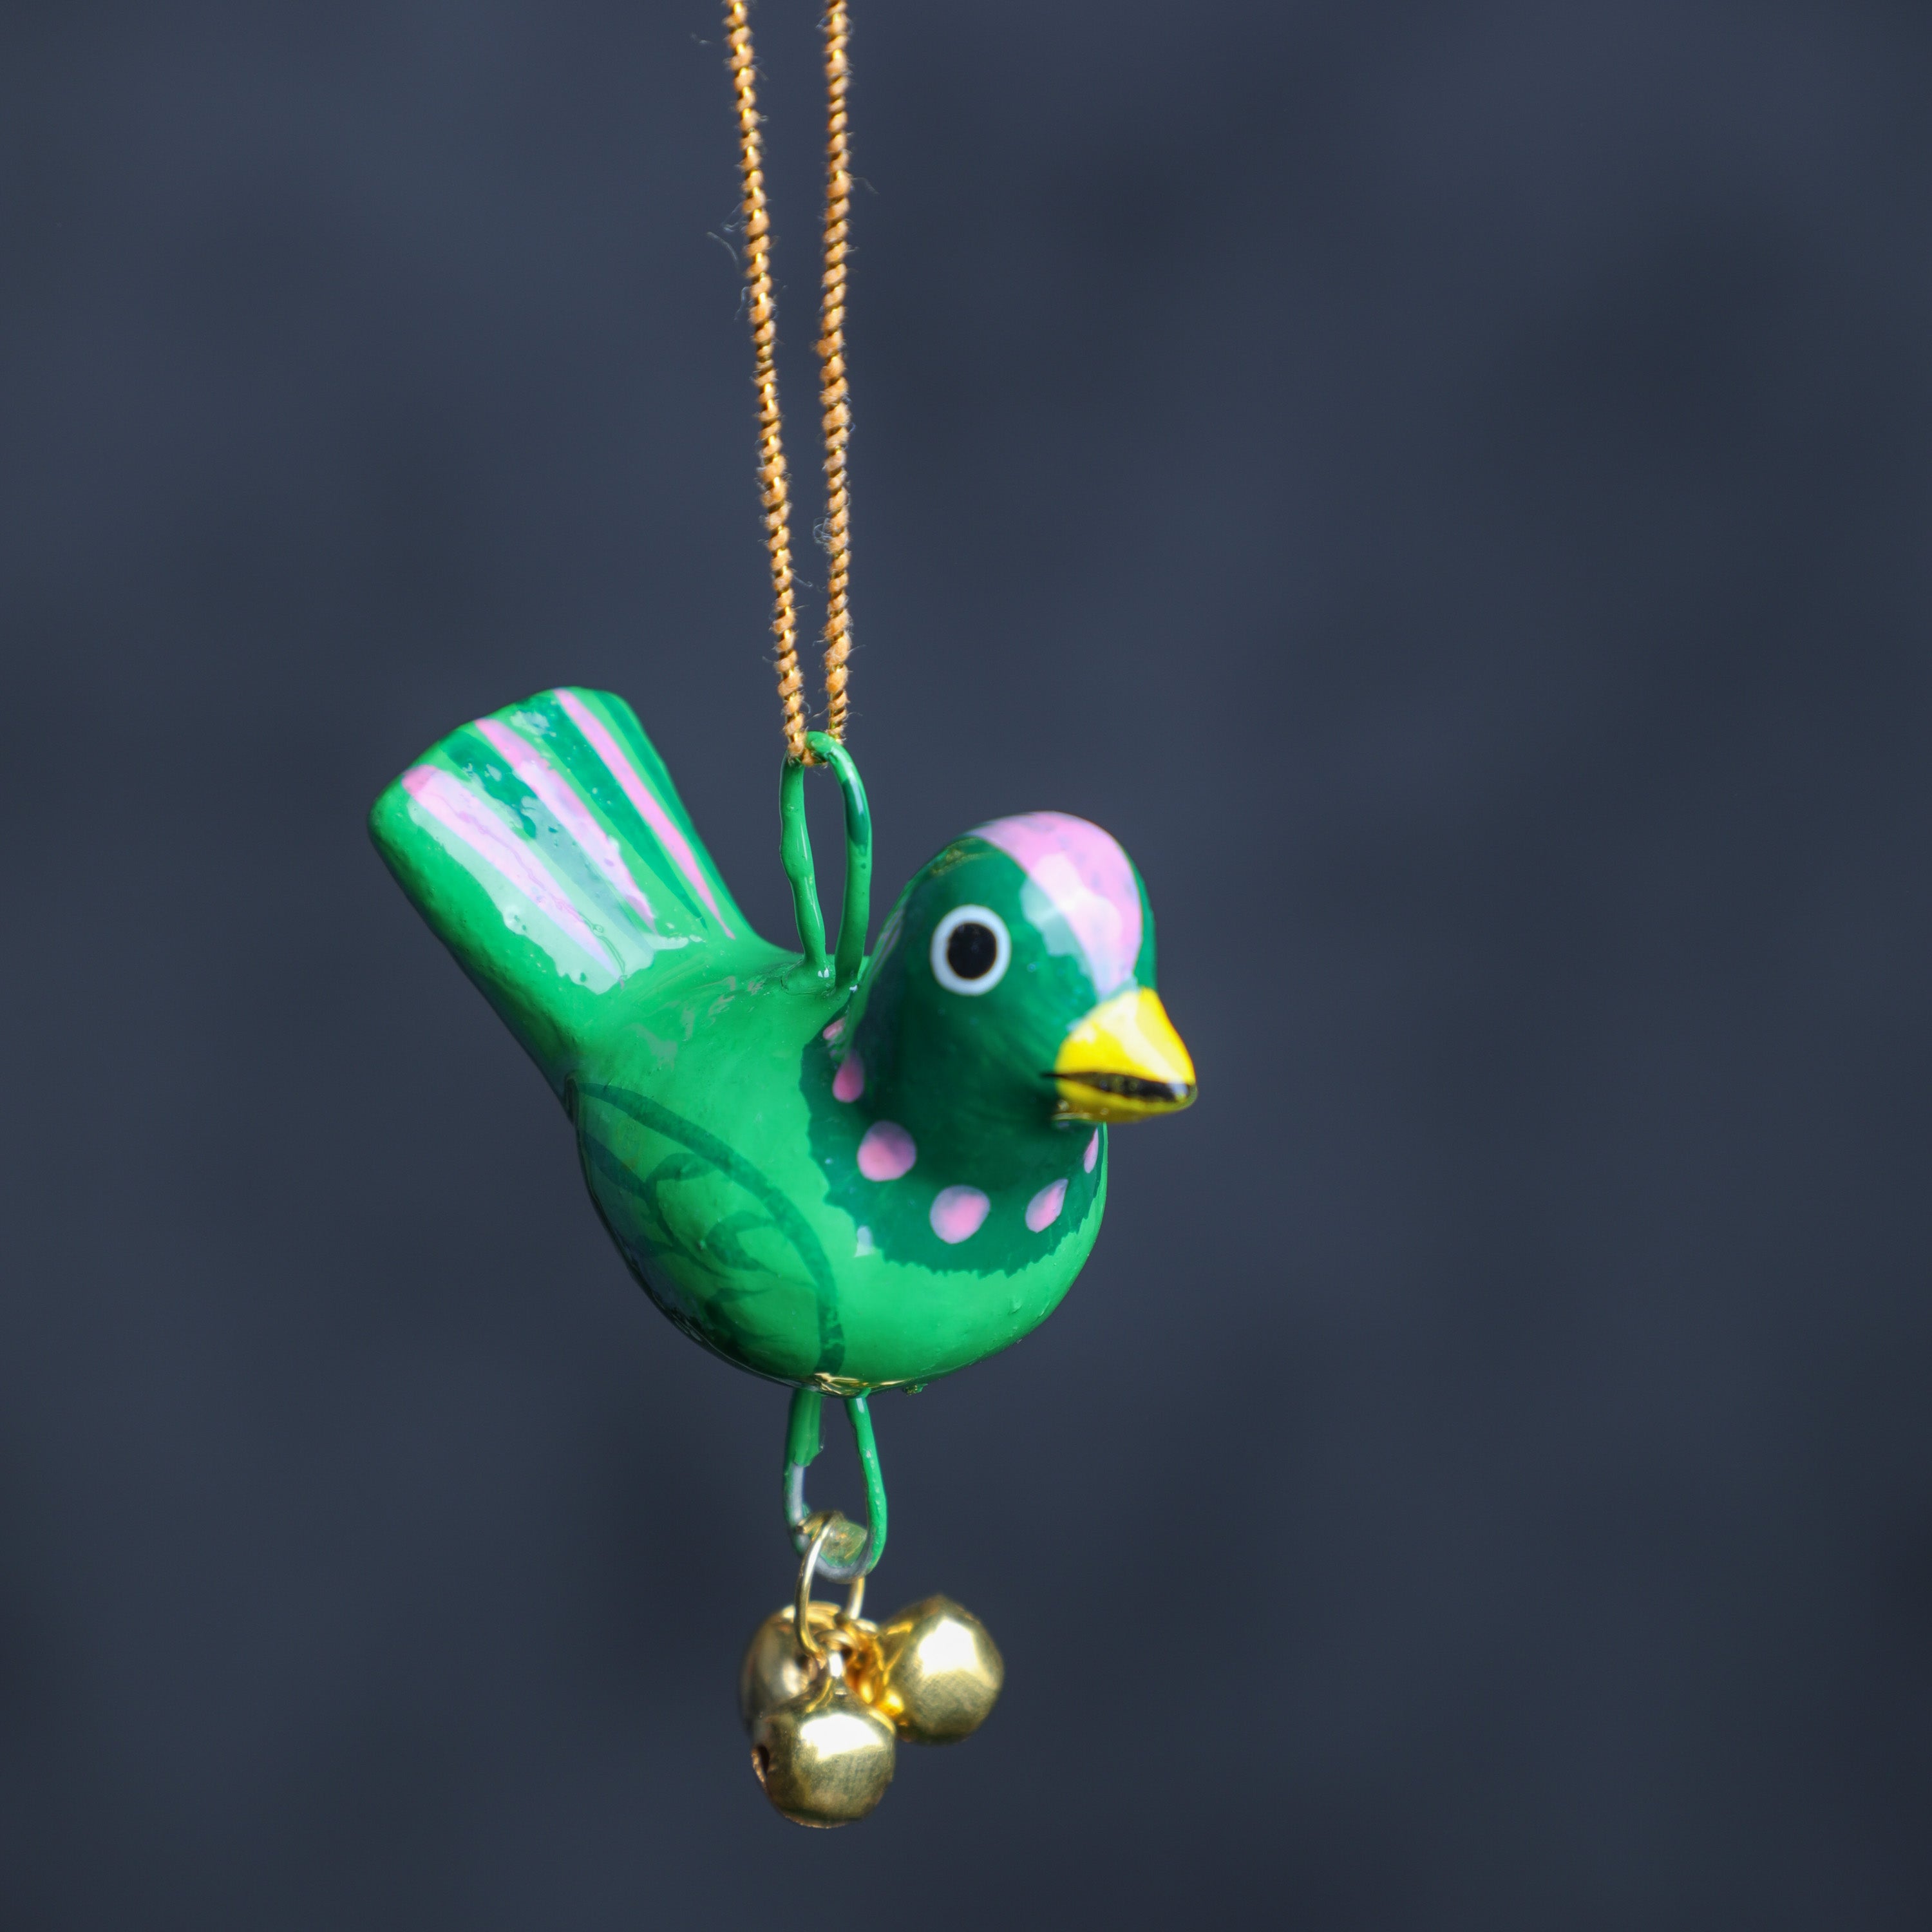 This hand painted hanging parrot chime with bell is crafted in wood